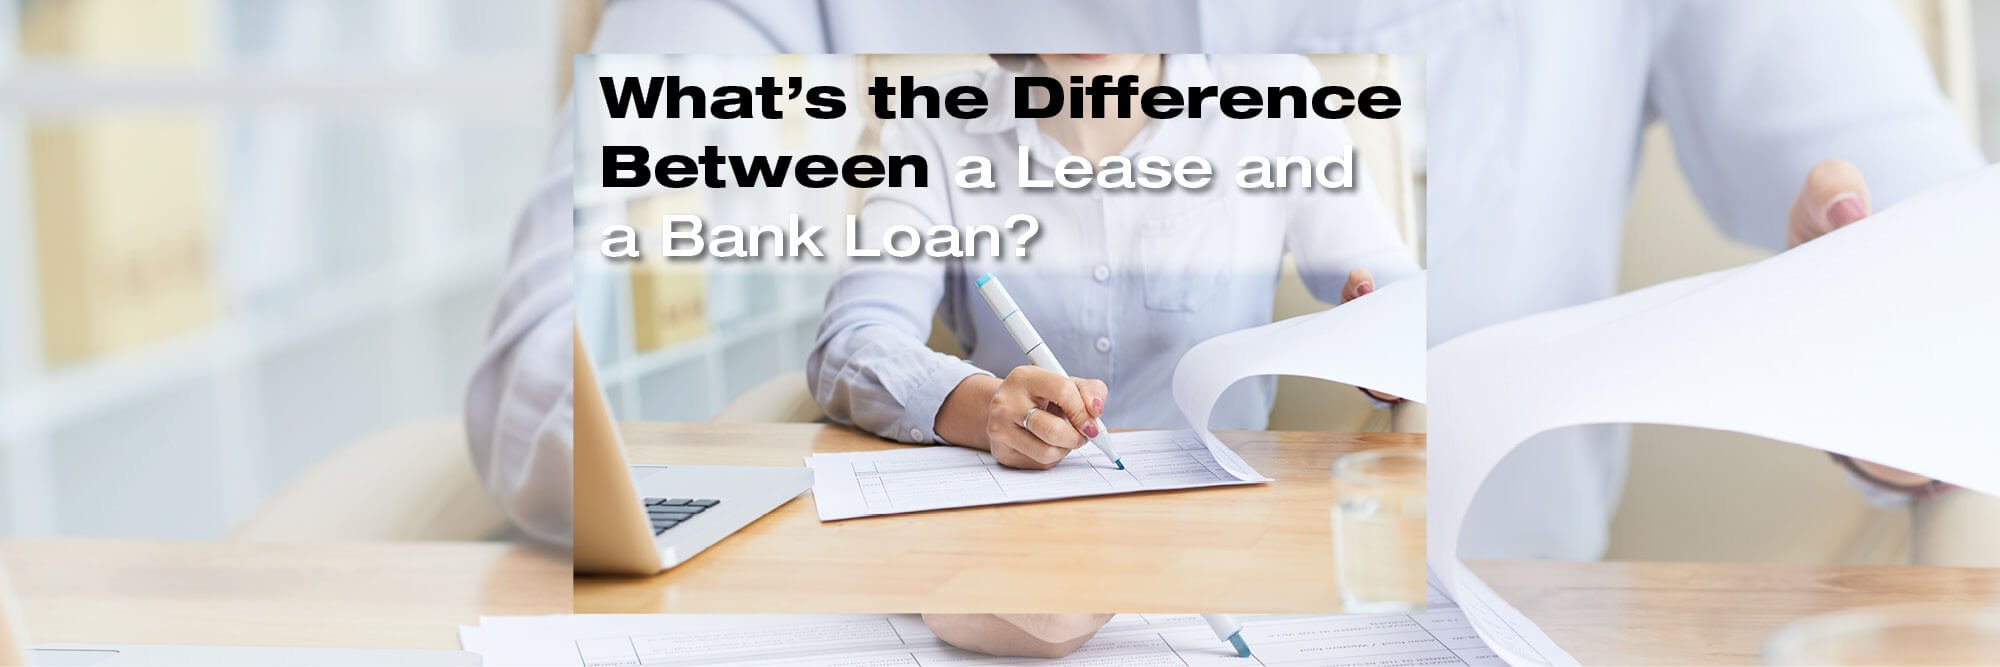 What's the Difference Between a Lease and a Bank Loan?